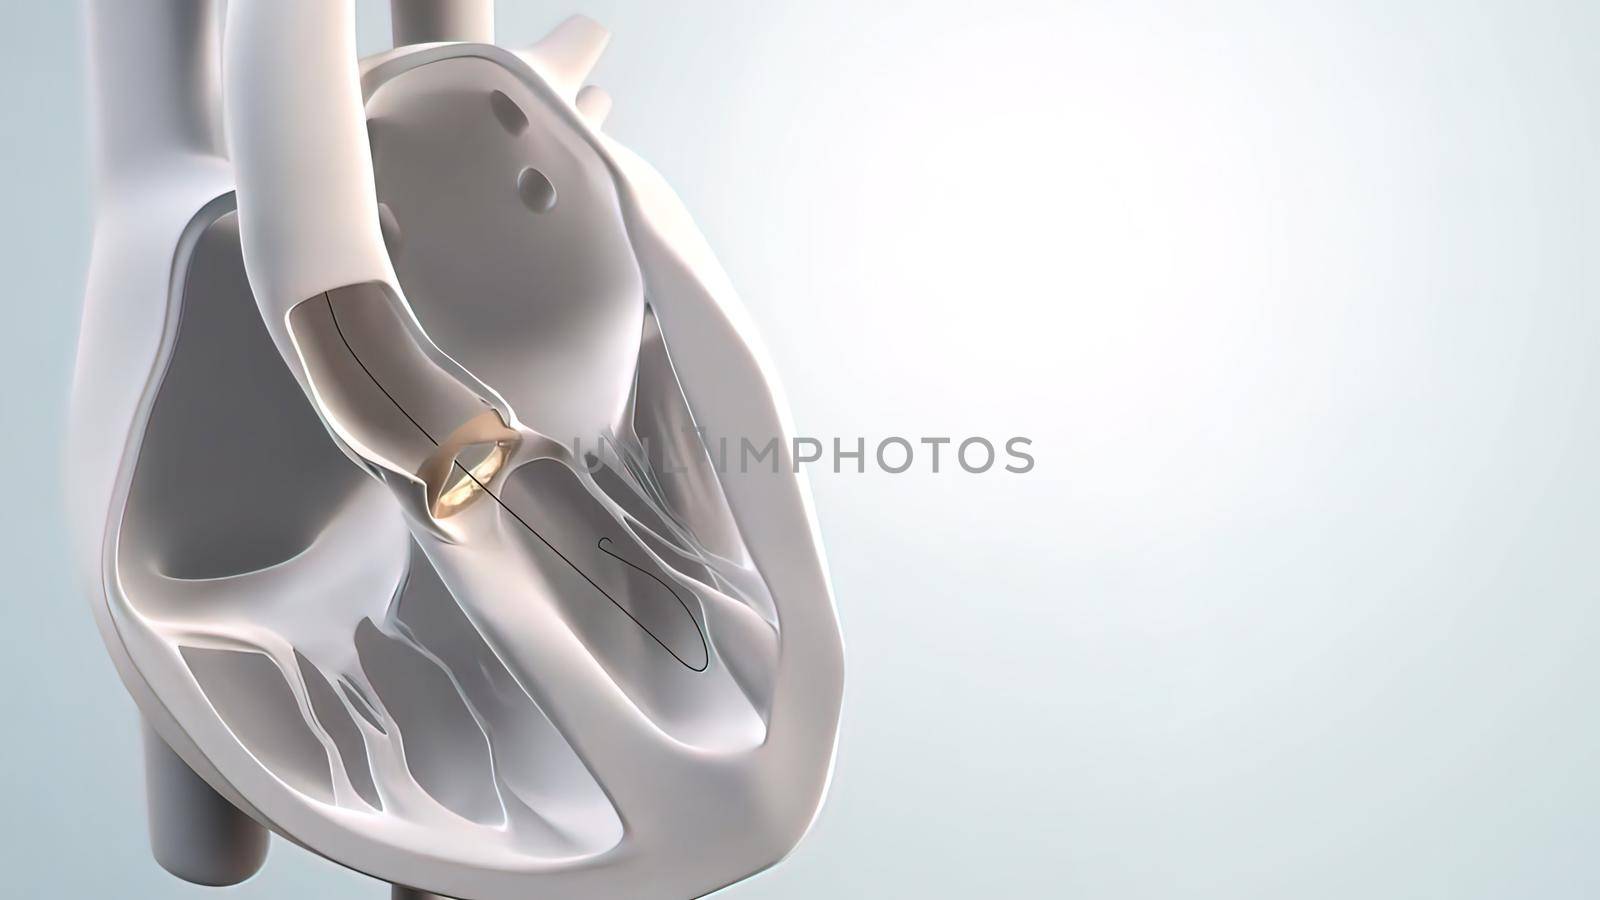 The Cardiovascular System. 3D Medical 3D Render of the Aortic Valve Expansion by creativepic